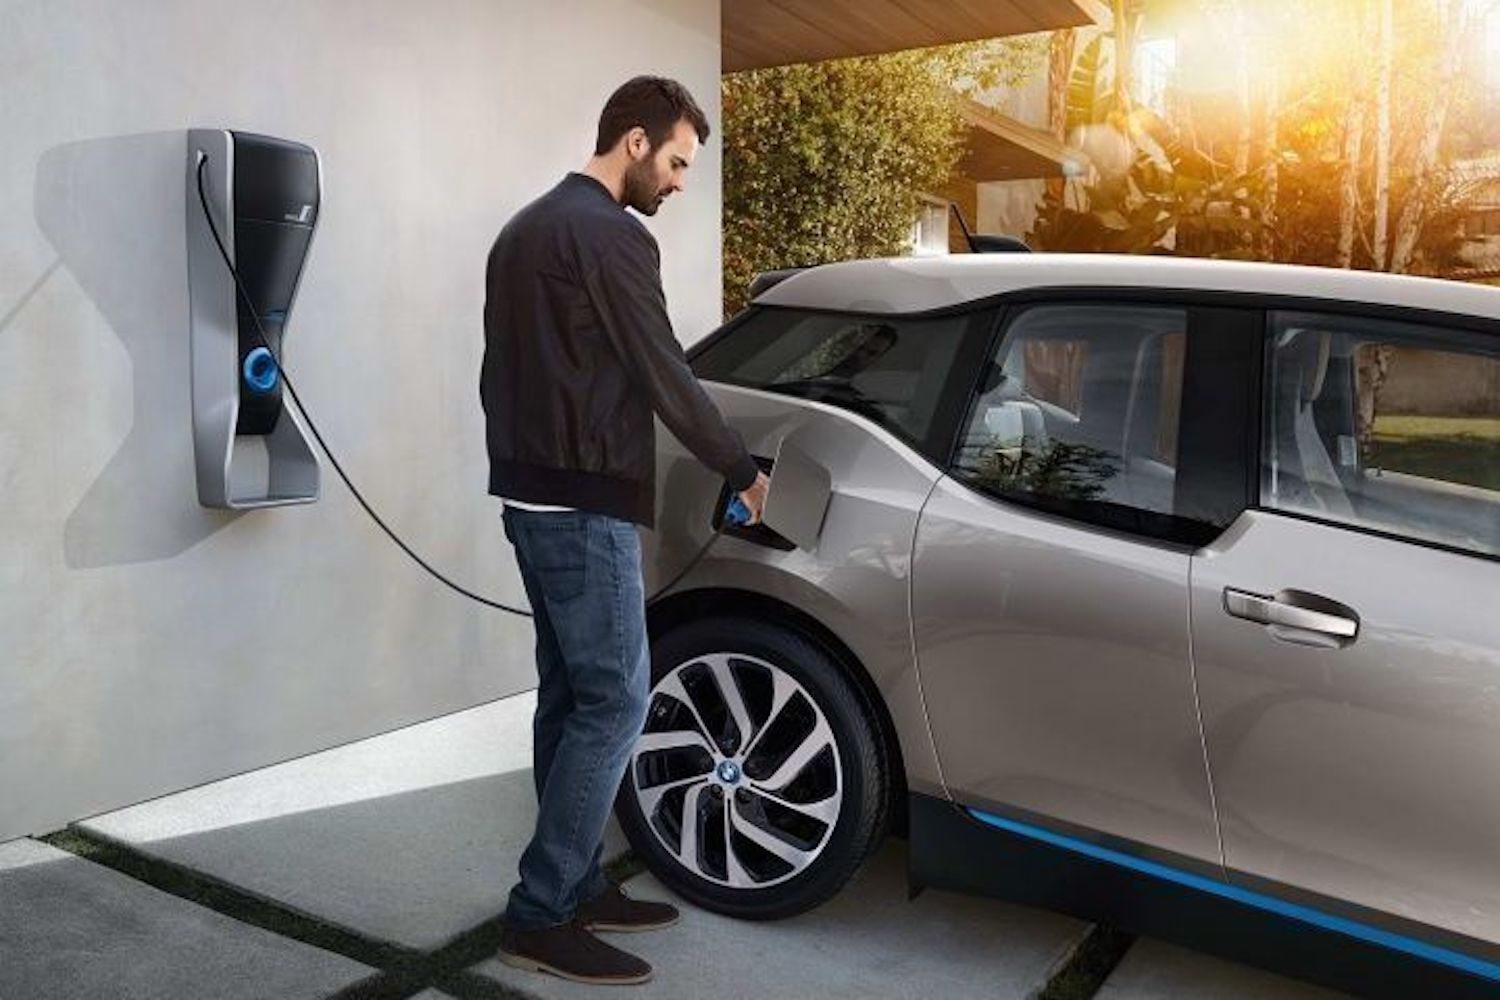 cost-of-electric-cars-puts-off-buyers-car-and-motoring-news-by